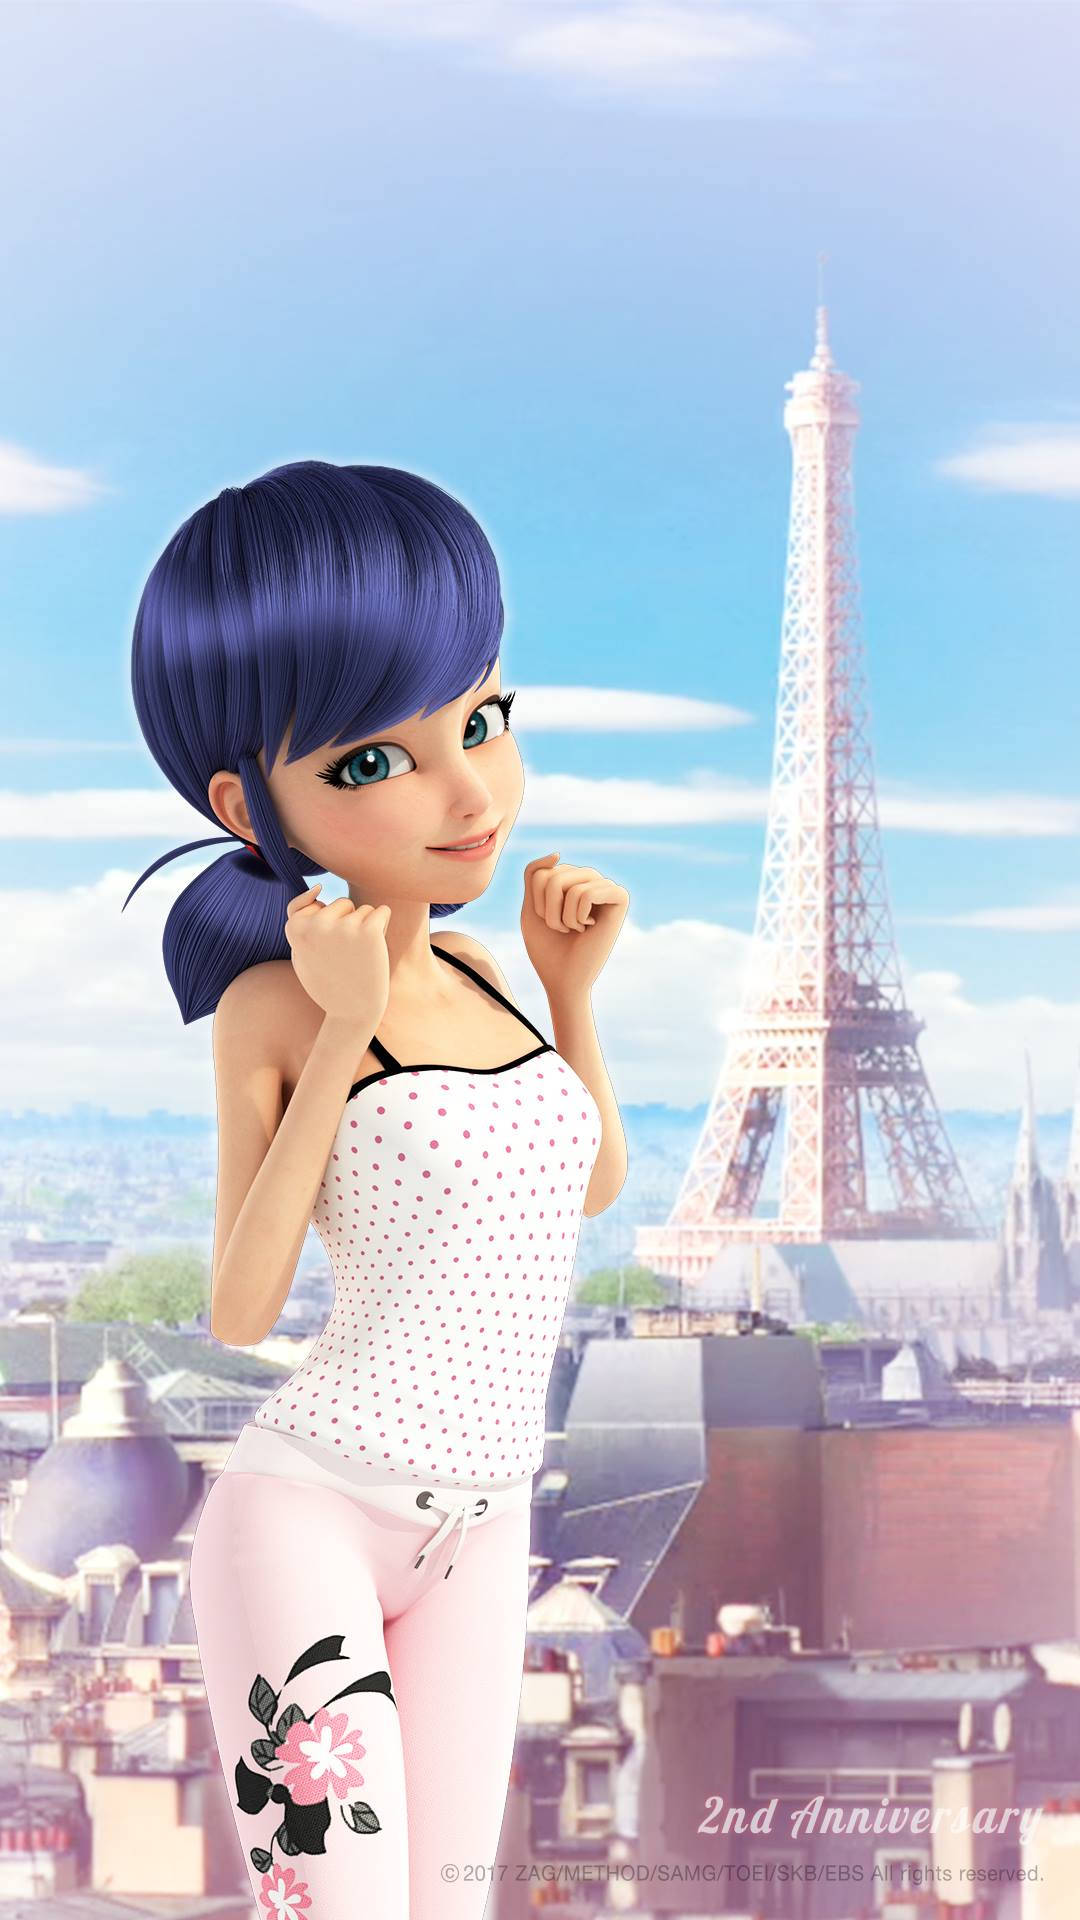 Marinette In New Official Image Background